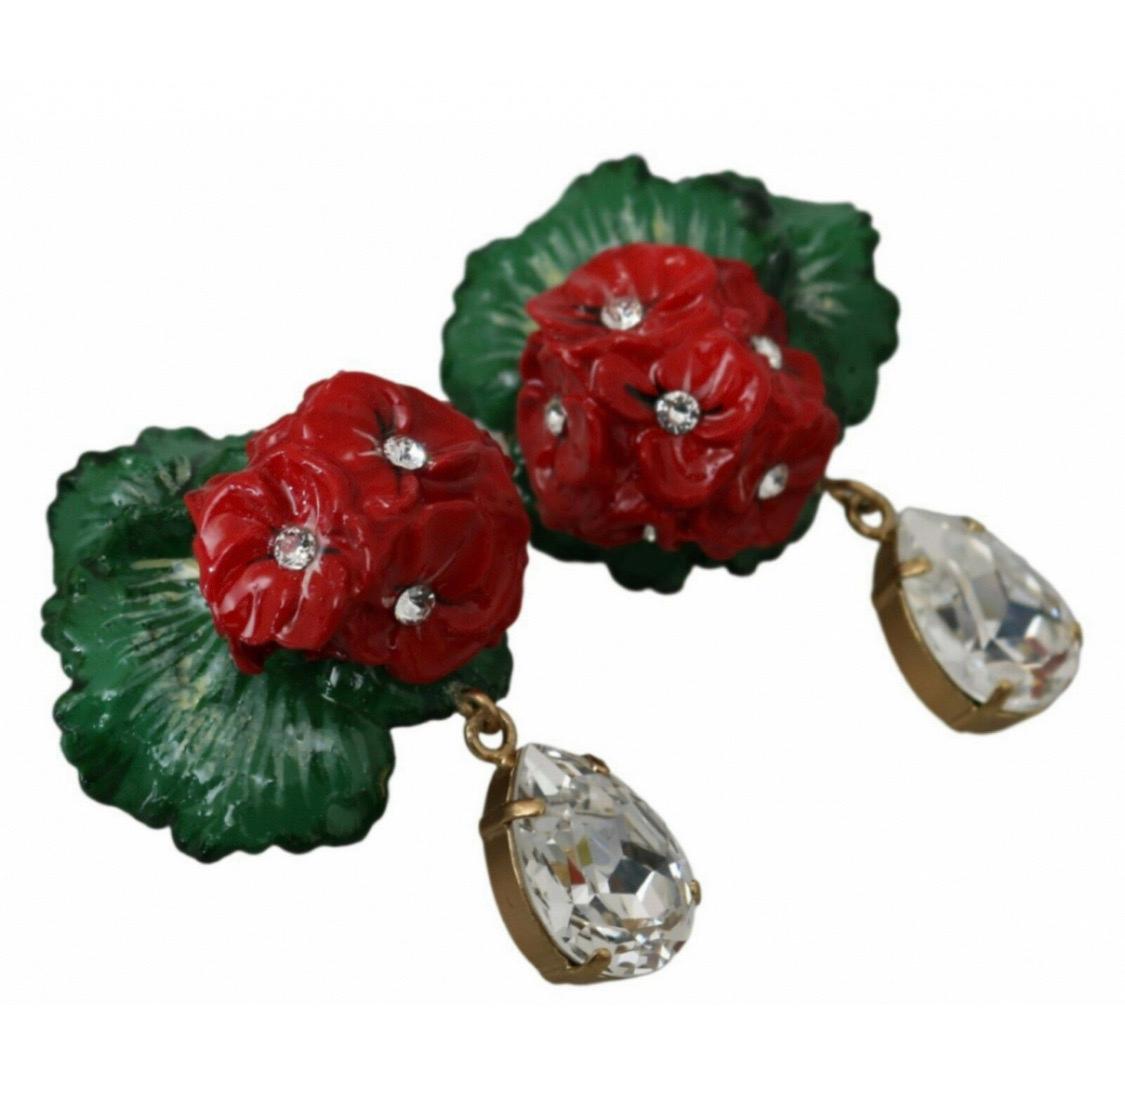 Gorgeous brand new with tags,
100% Authentic Dolce &
Gabbana earrings.

Model: Clip-on, dangle

Motive: Flowers,

Material: 40% Brass, 20% glass,
40% resin

Color: Red, green
Logo details
Made in Italy

Length: 5.5cm
Dolce & Gabbana original tags